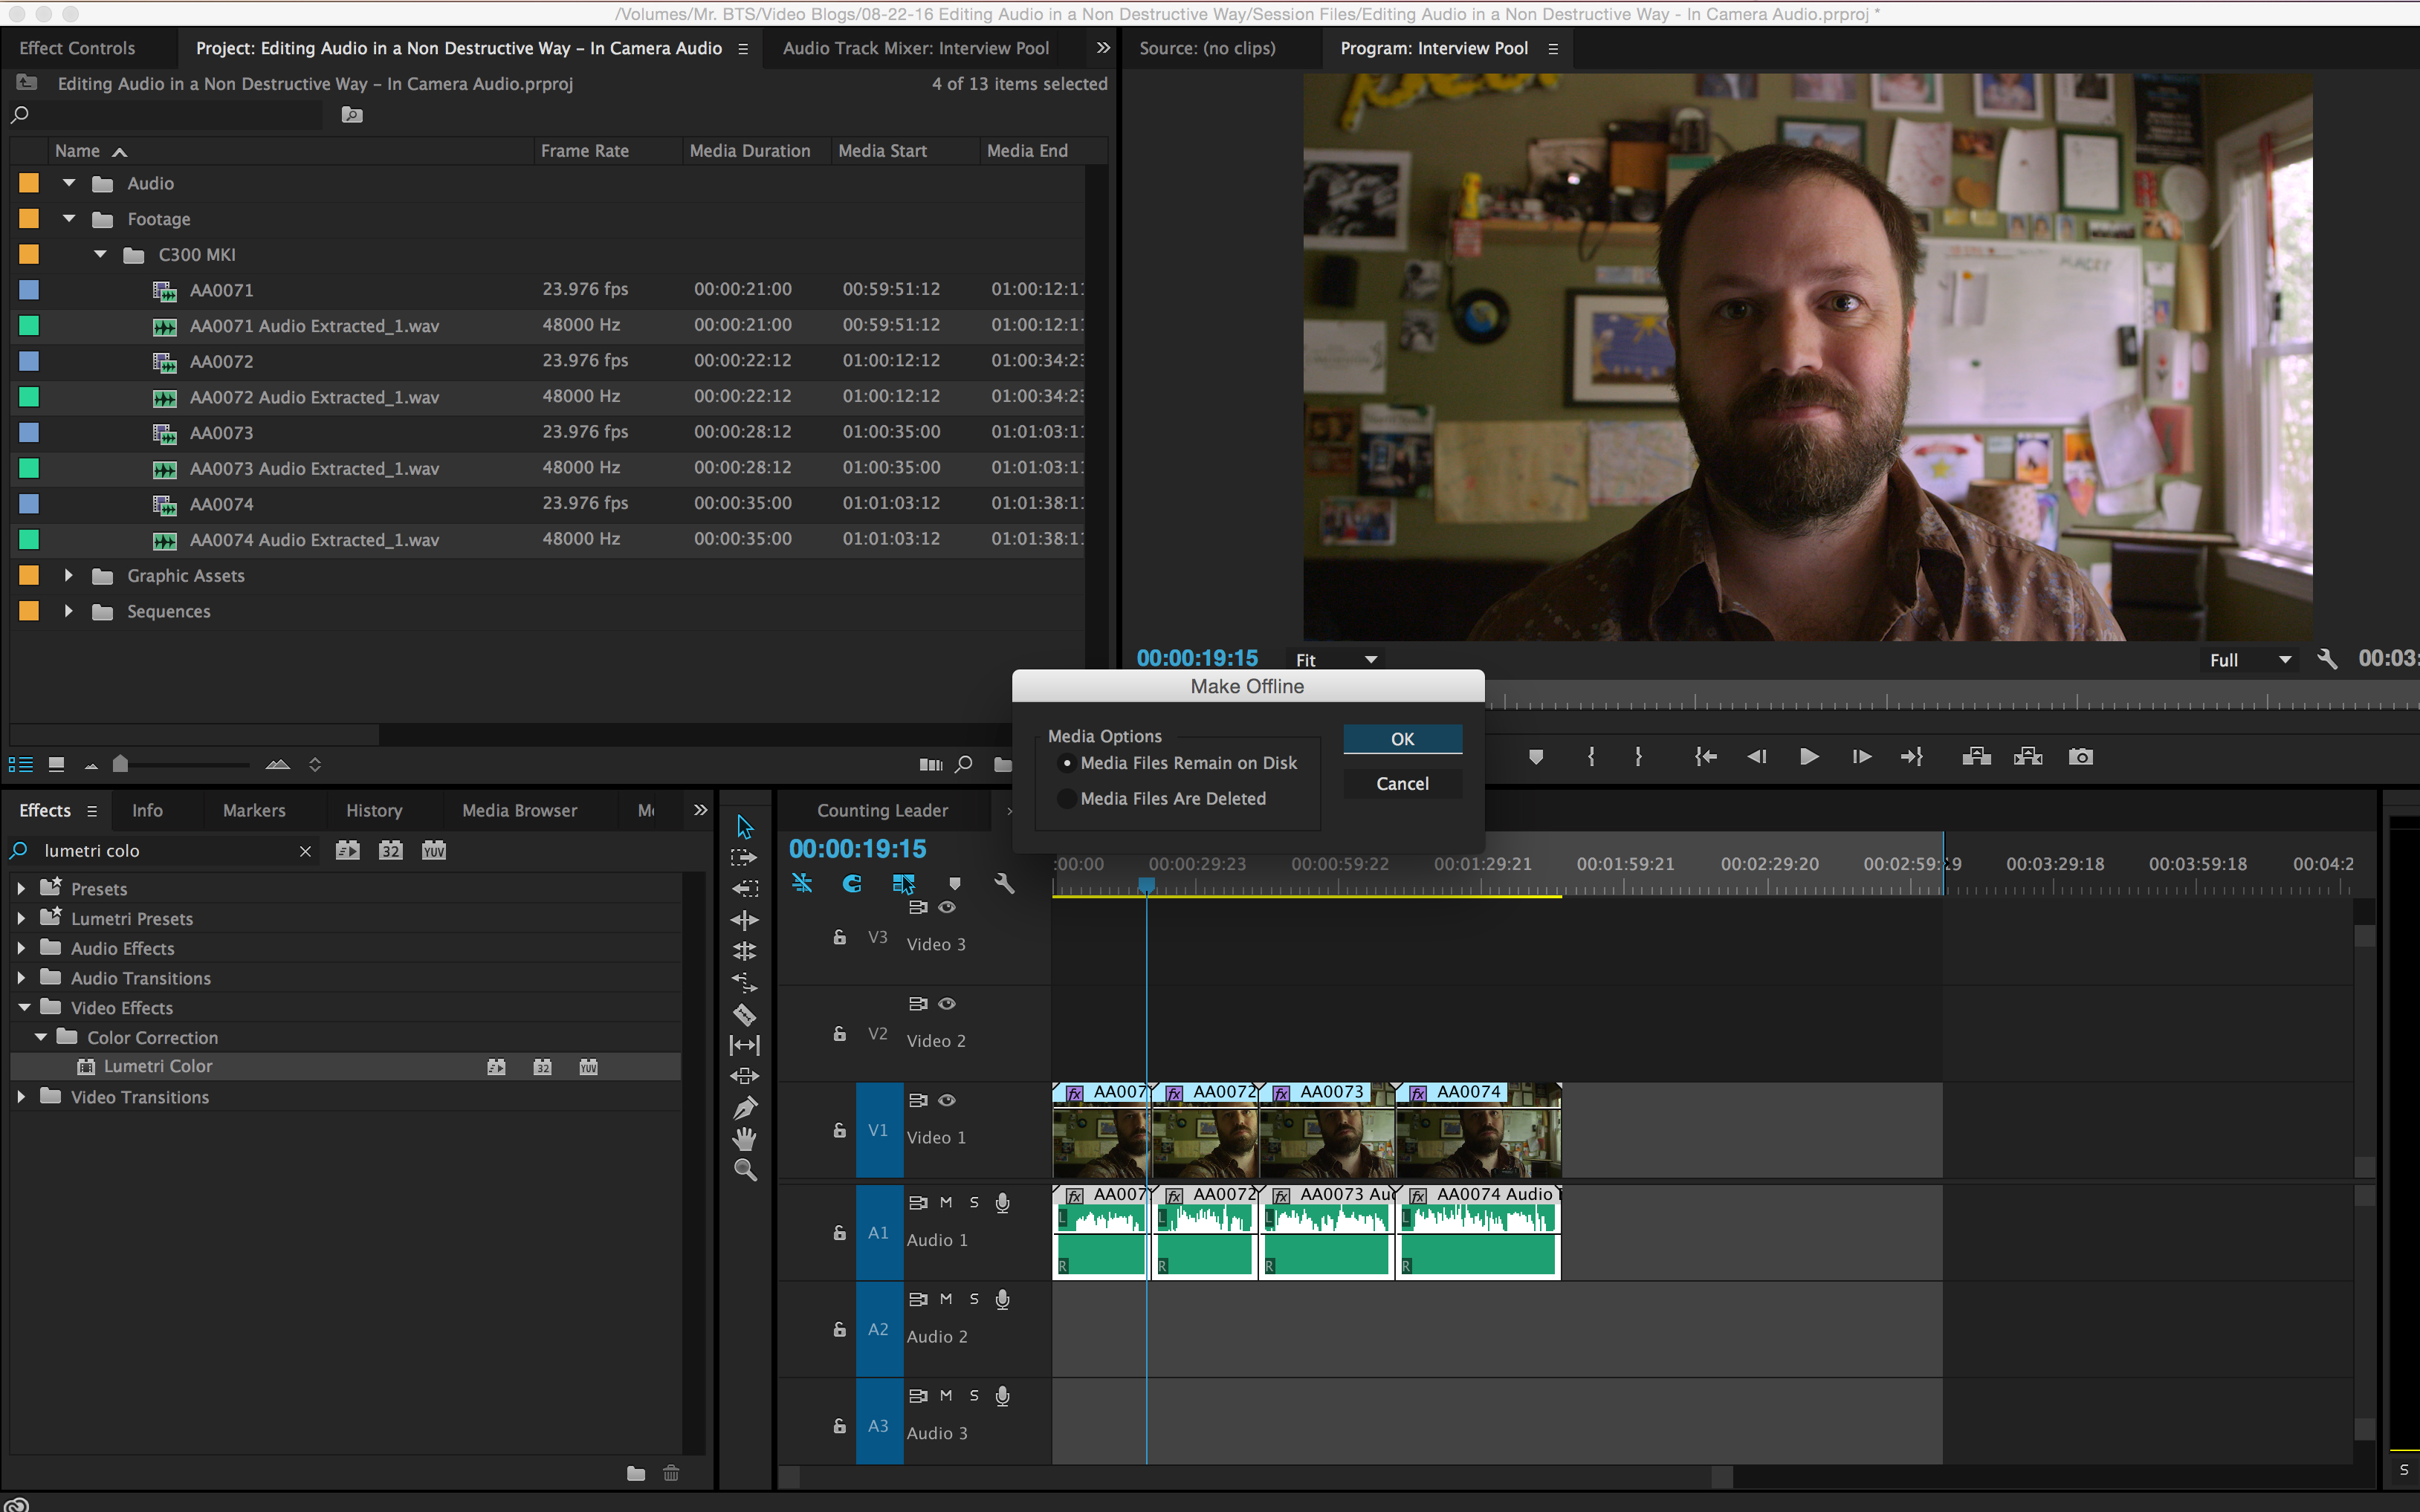 How to Simultaneously Edit Multiple Internal Camera Audio Files: Media Files Remain on Disk Adobe Premiere CC